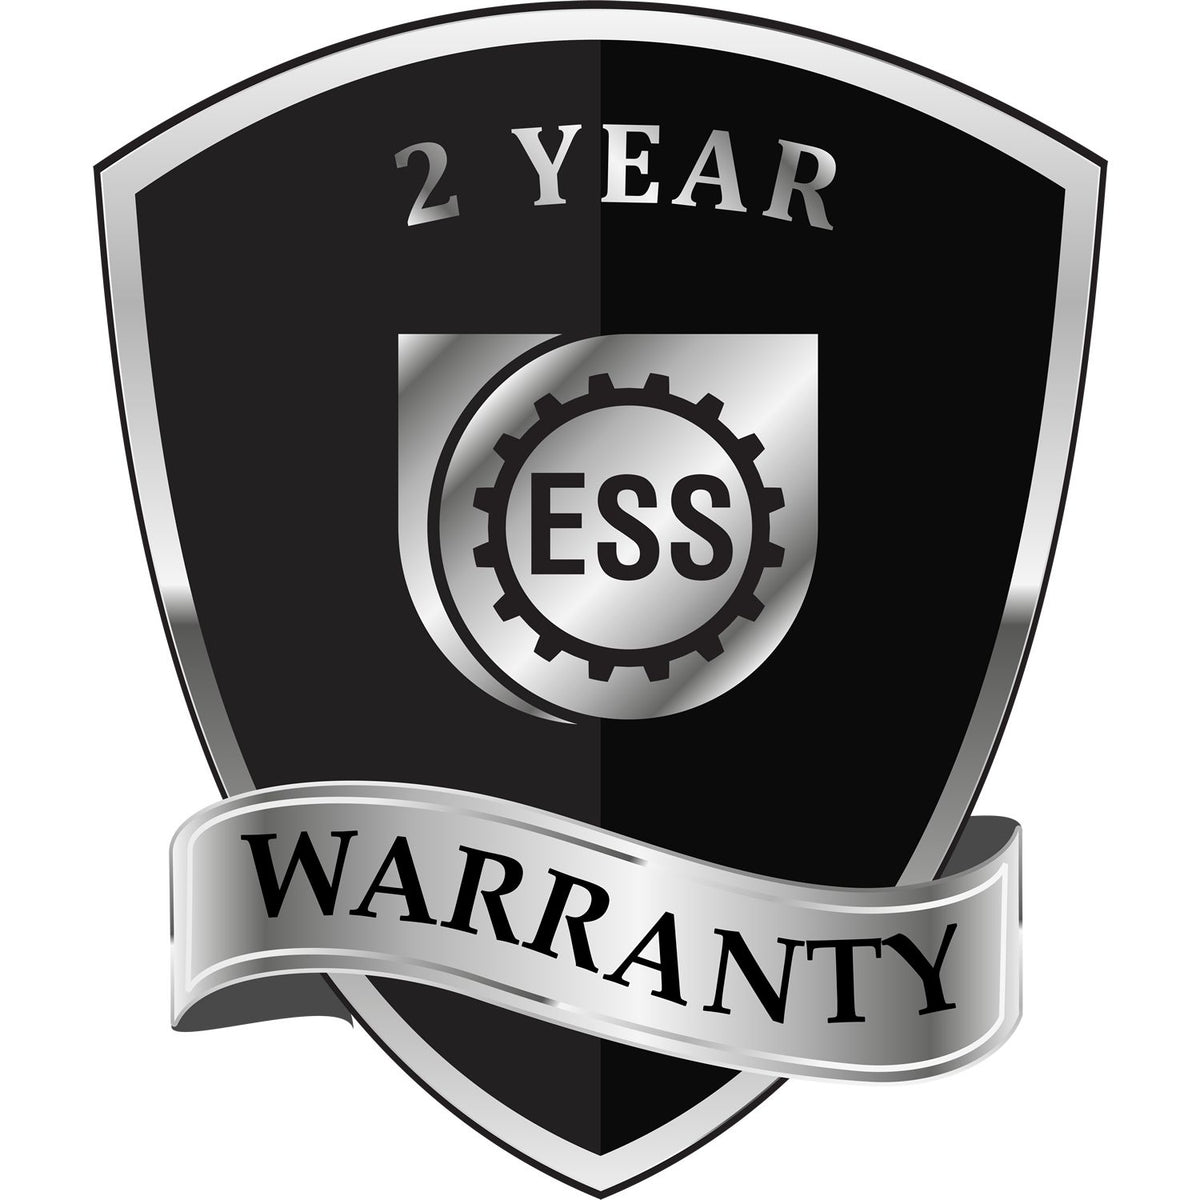 A badge or emblem showing a warranty icon for the Heavy Duty Cast Iron Maine Architect Embosser